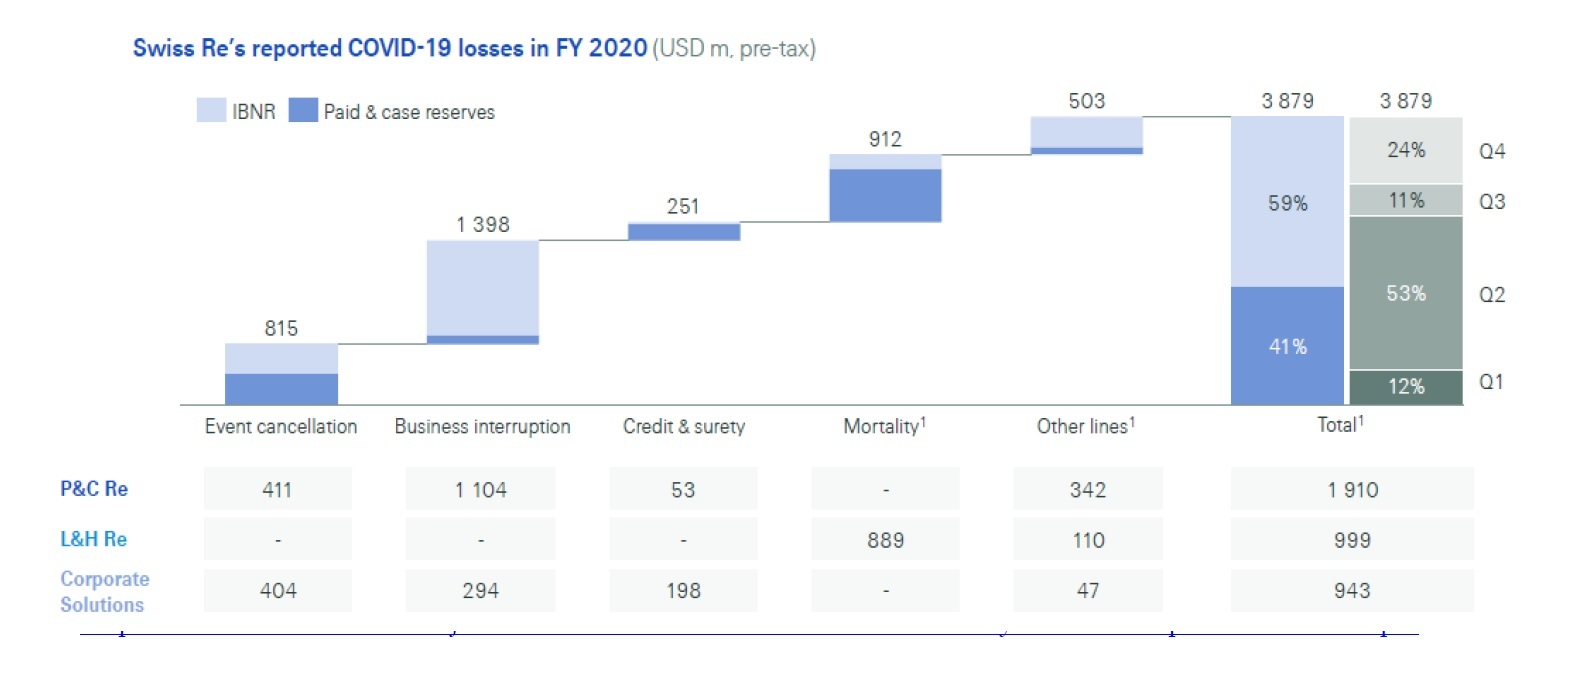 Swiss Re's Reported COVID-19 losses in FY 2020